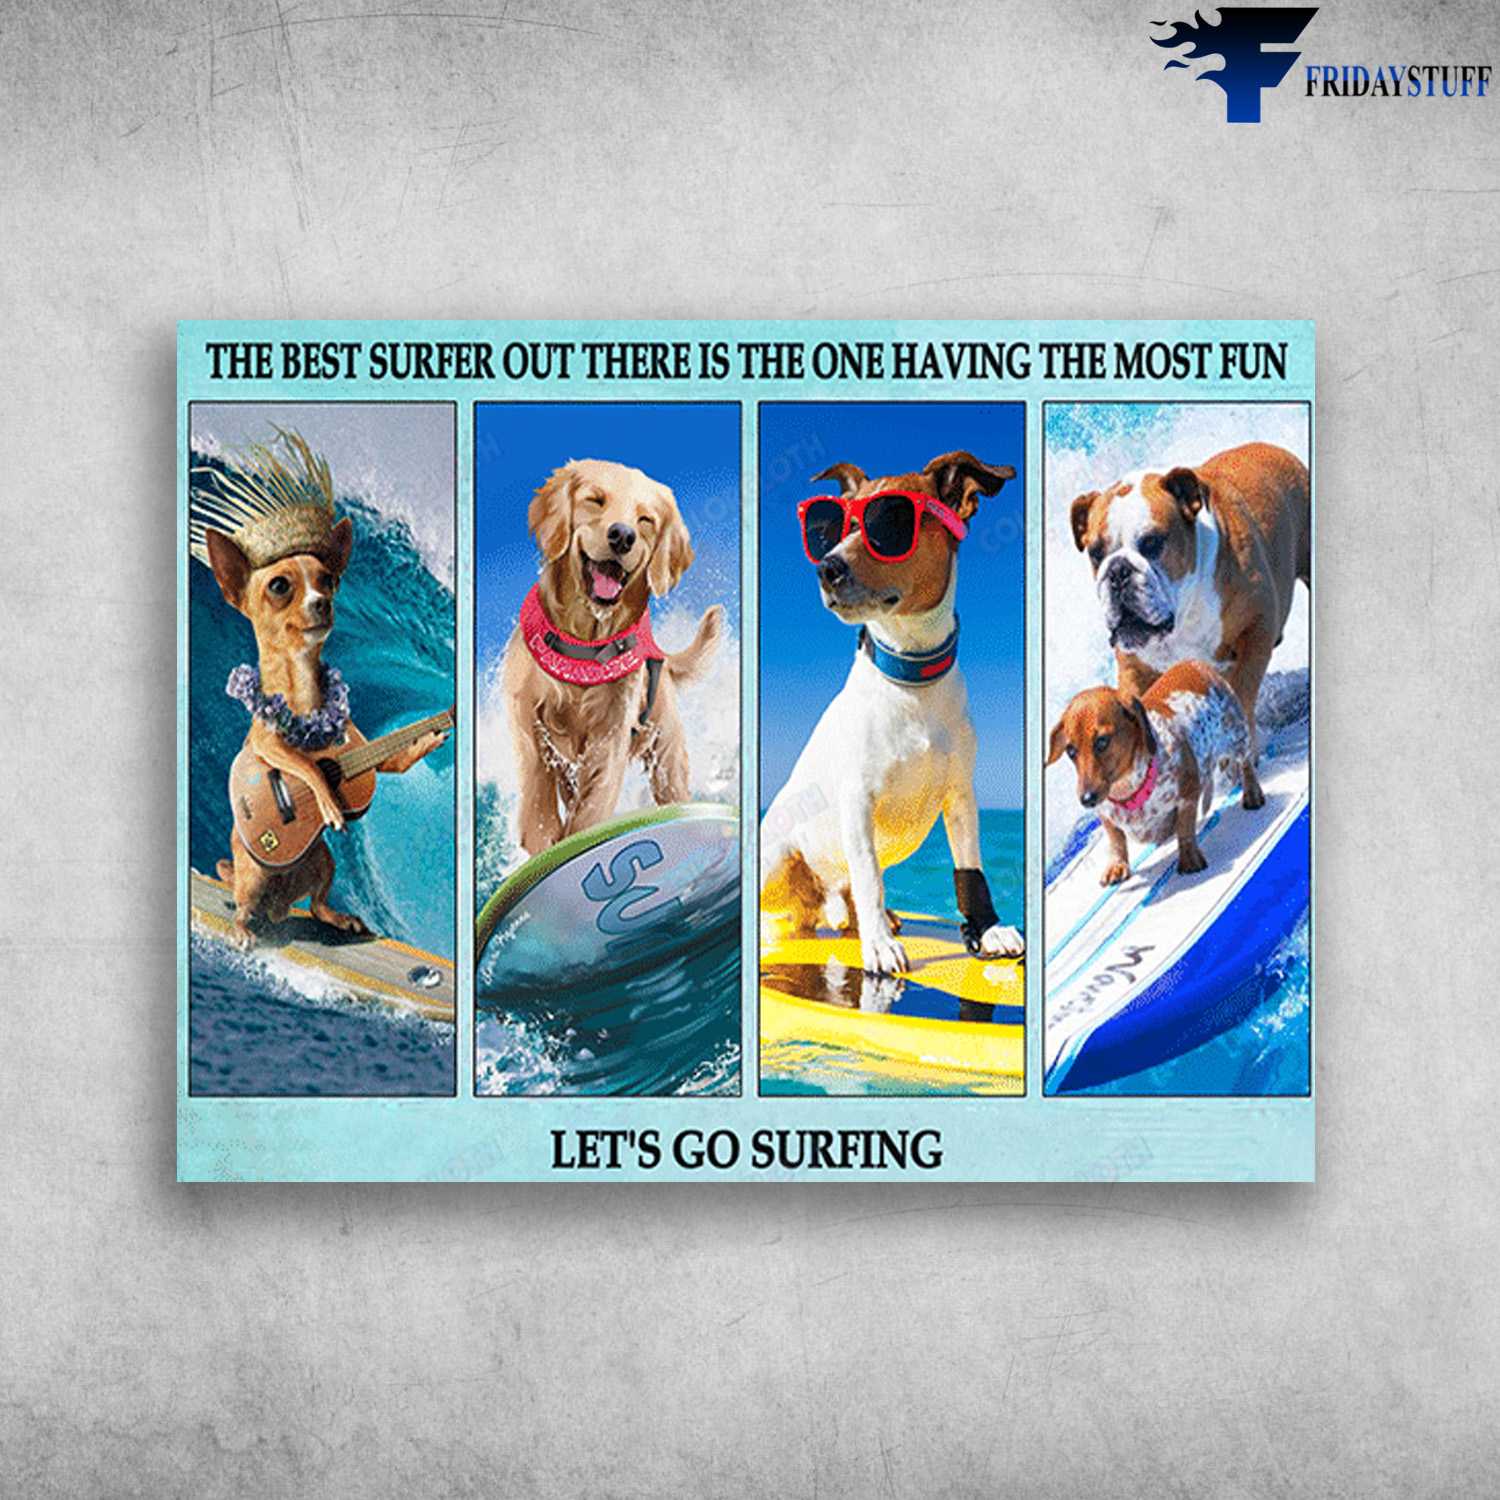 Dog Surfing, Dog Lover, Surfing Poster, The Best Surfer Out, There Is The One, Having The Most Fun, Let's Go Surfing